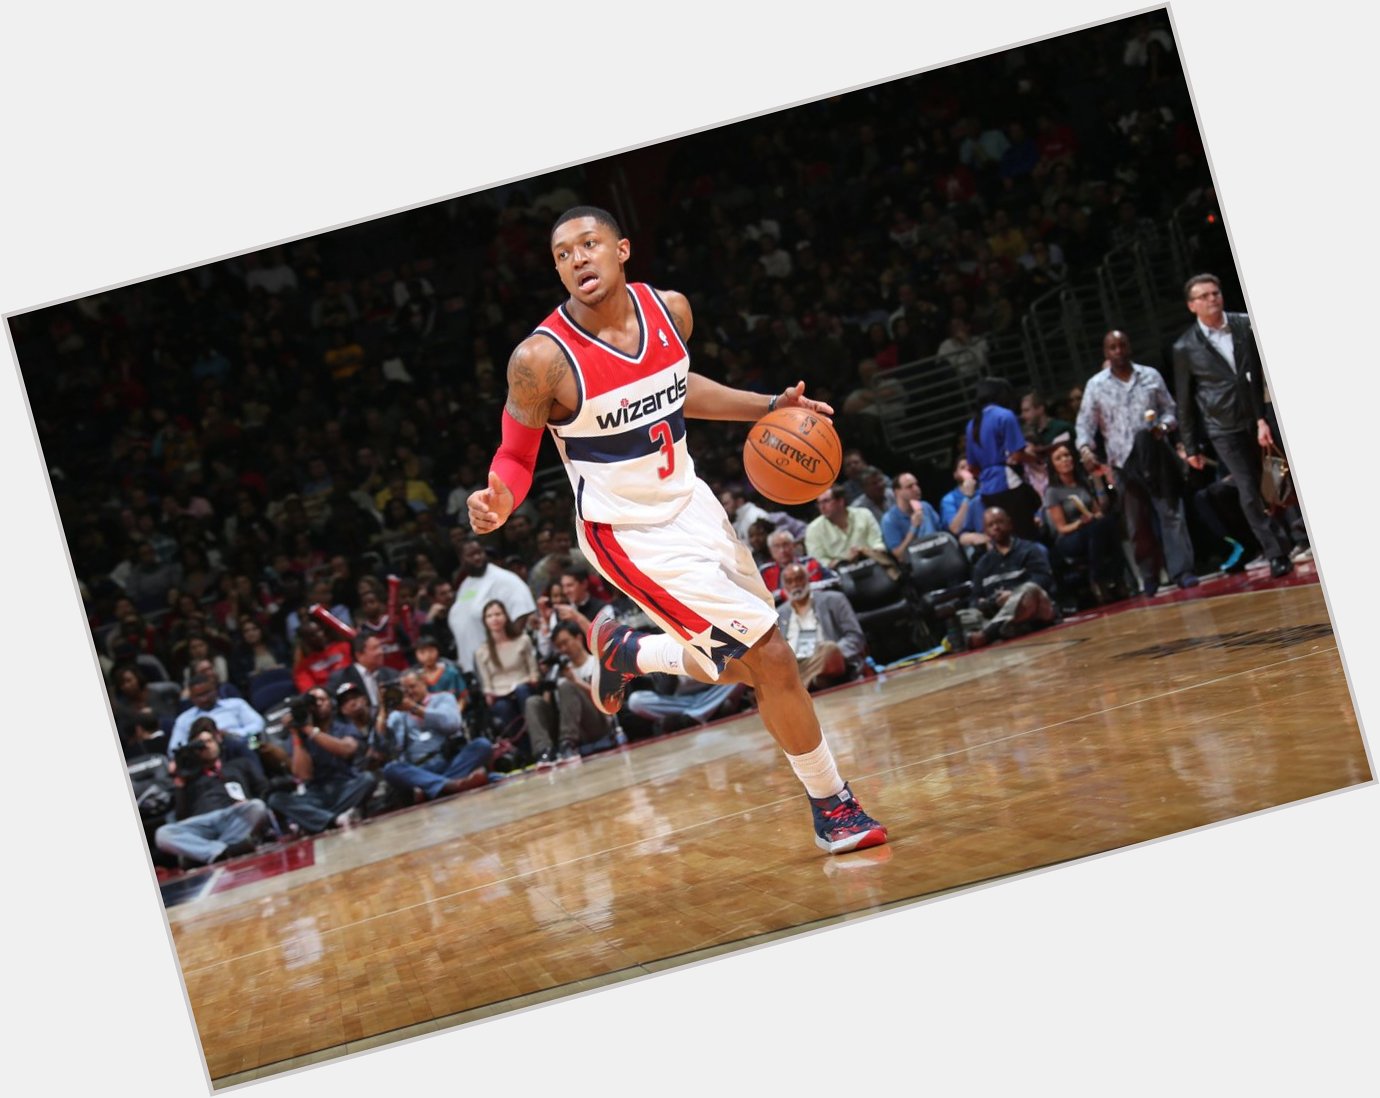 Happy Birthday to Bradley Beal who turns 24 today! 